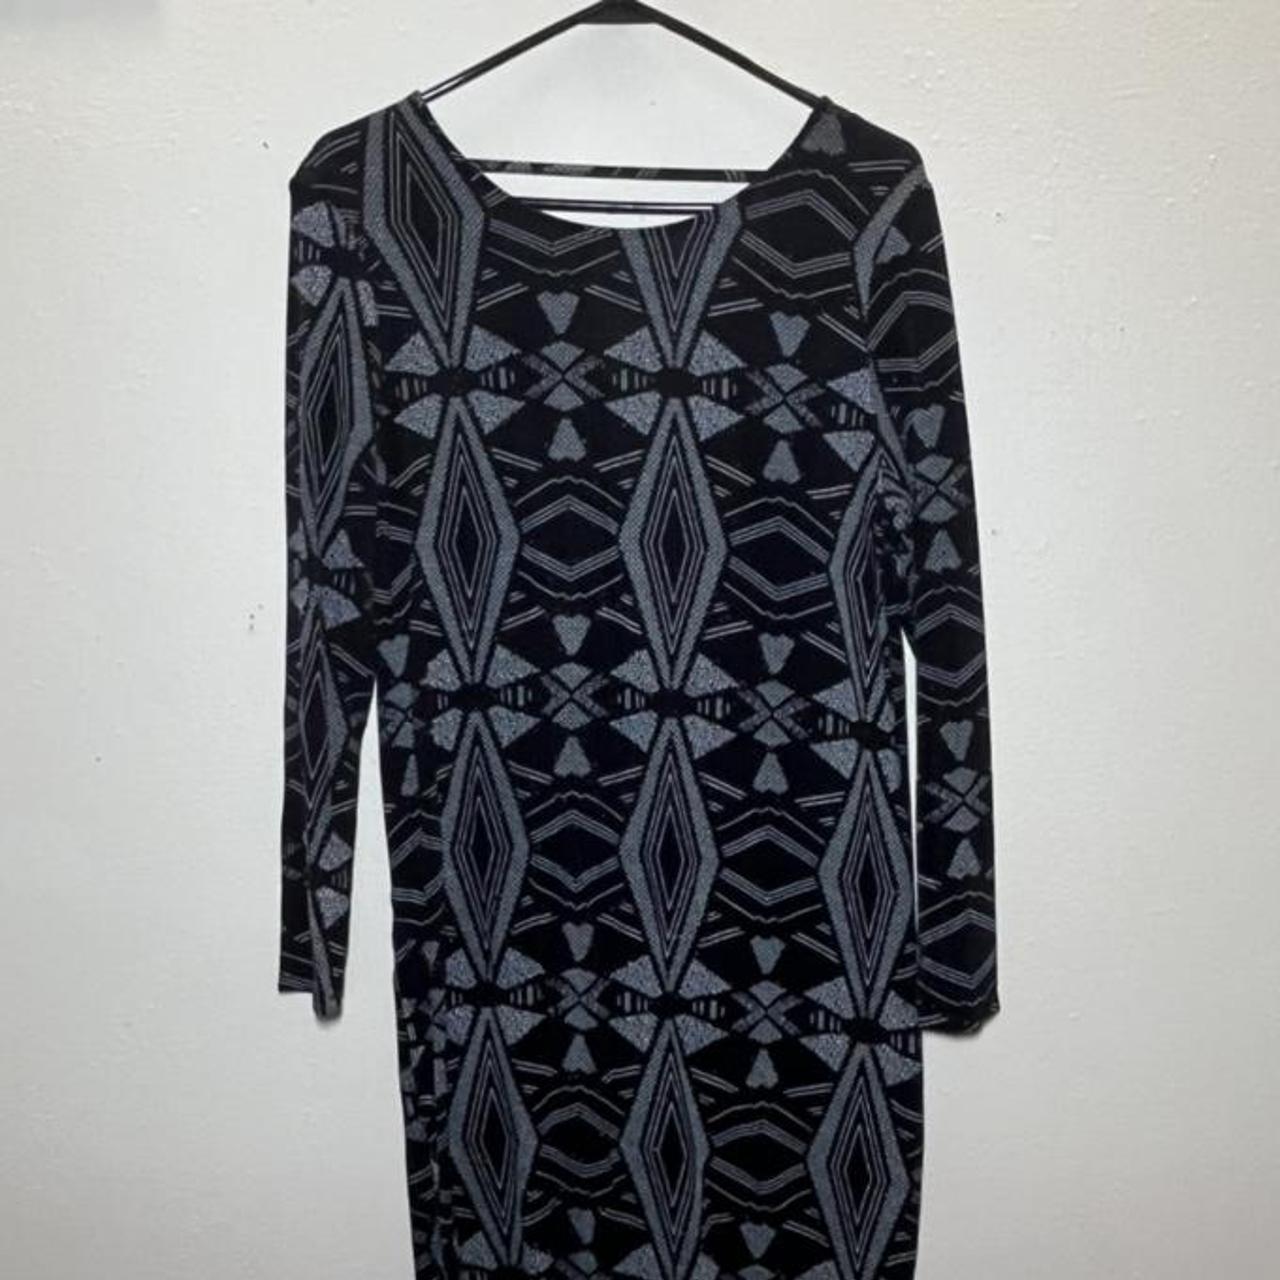 Product Image 3 - Sparkle Geometric LBD

Back cutout with